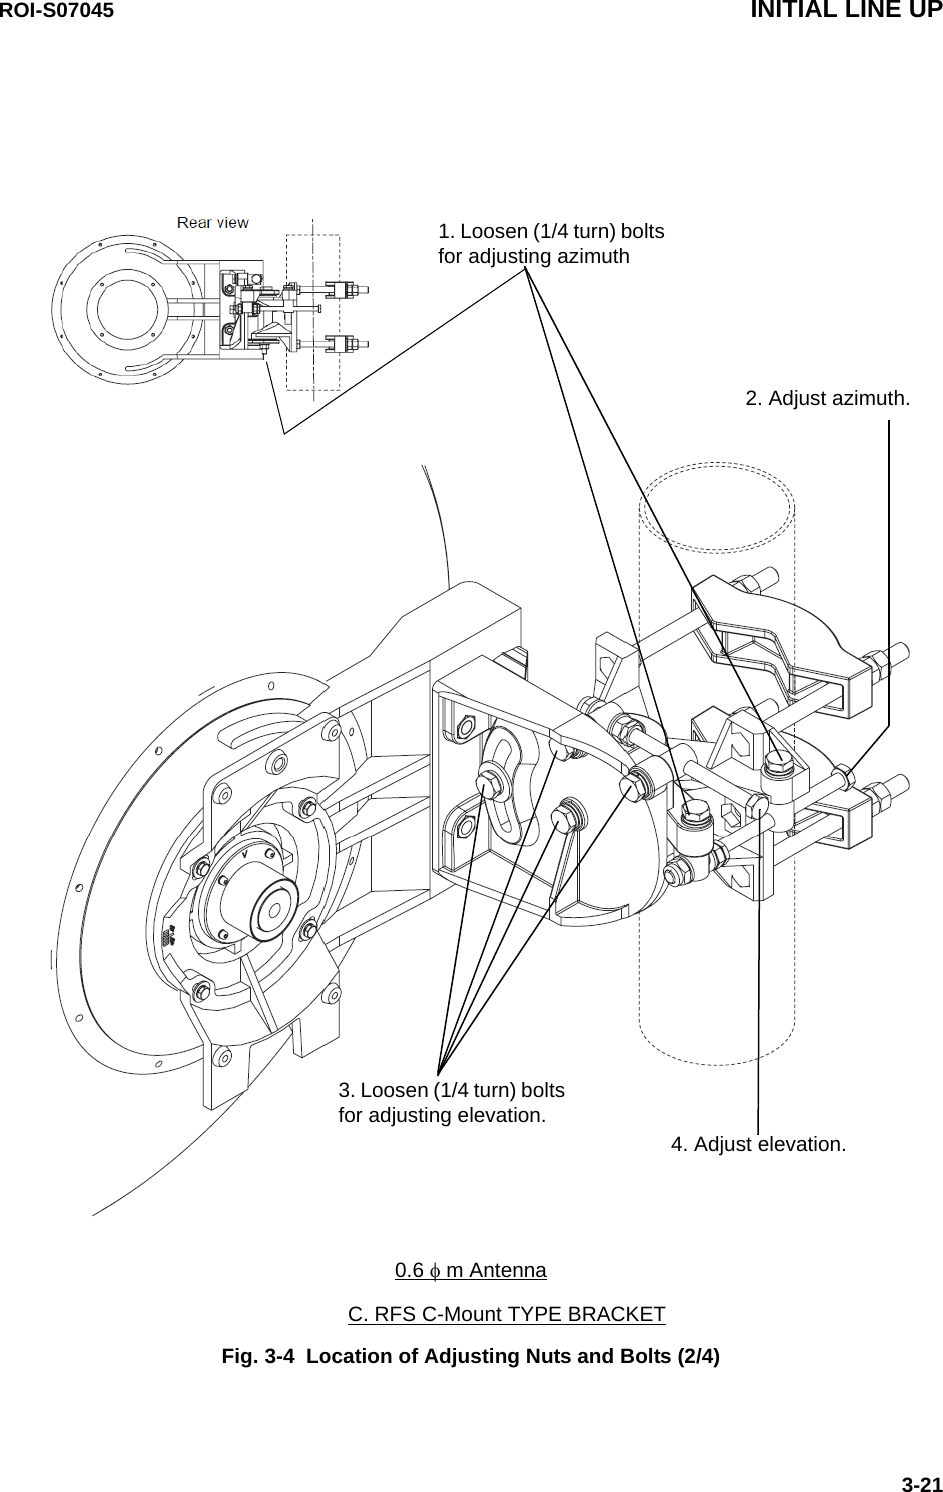 ROI-S07045 INITIAL LINE UP3-21Fig. 3-4  Location of Adjusting Nuts and Bolts (2/4)1. Loosen (1/4 turn) bolts for adjusting azimuth 0.6 φ m AntennaC. RFS C-Mount TYPE BRACKET3. Loosen (1/4 turn) bolts for adjusting elevation. 2. Adjust azimuth.4. Adjust elevation. 